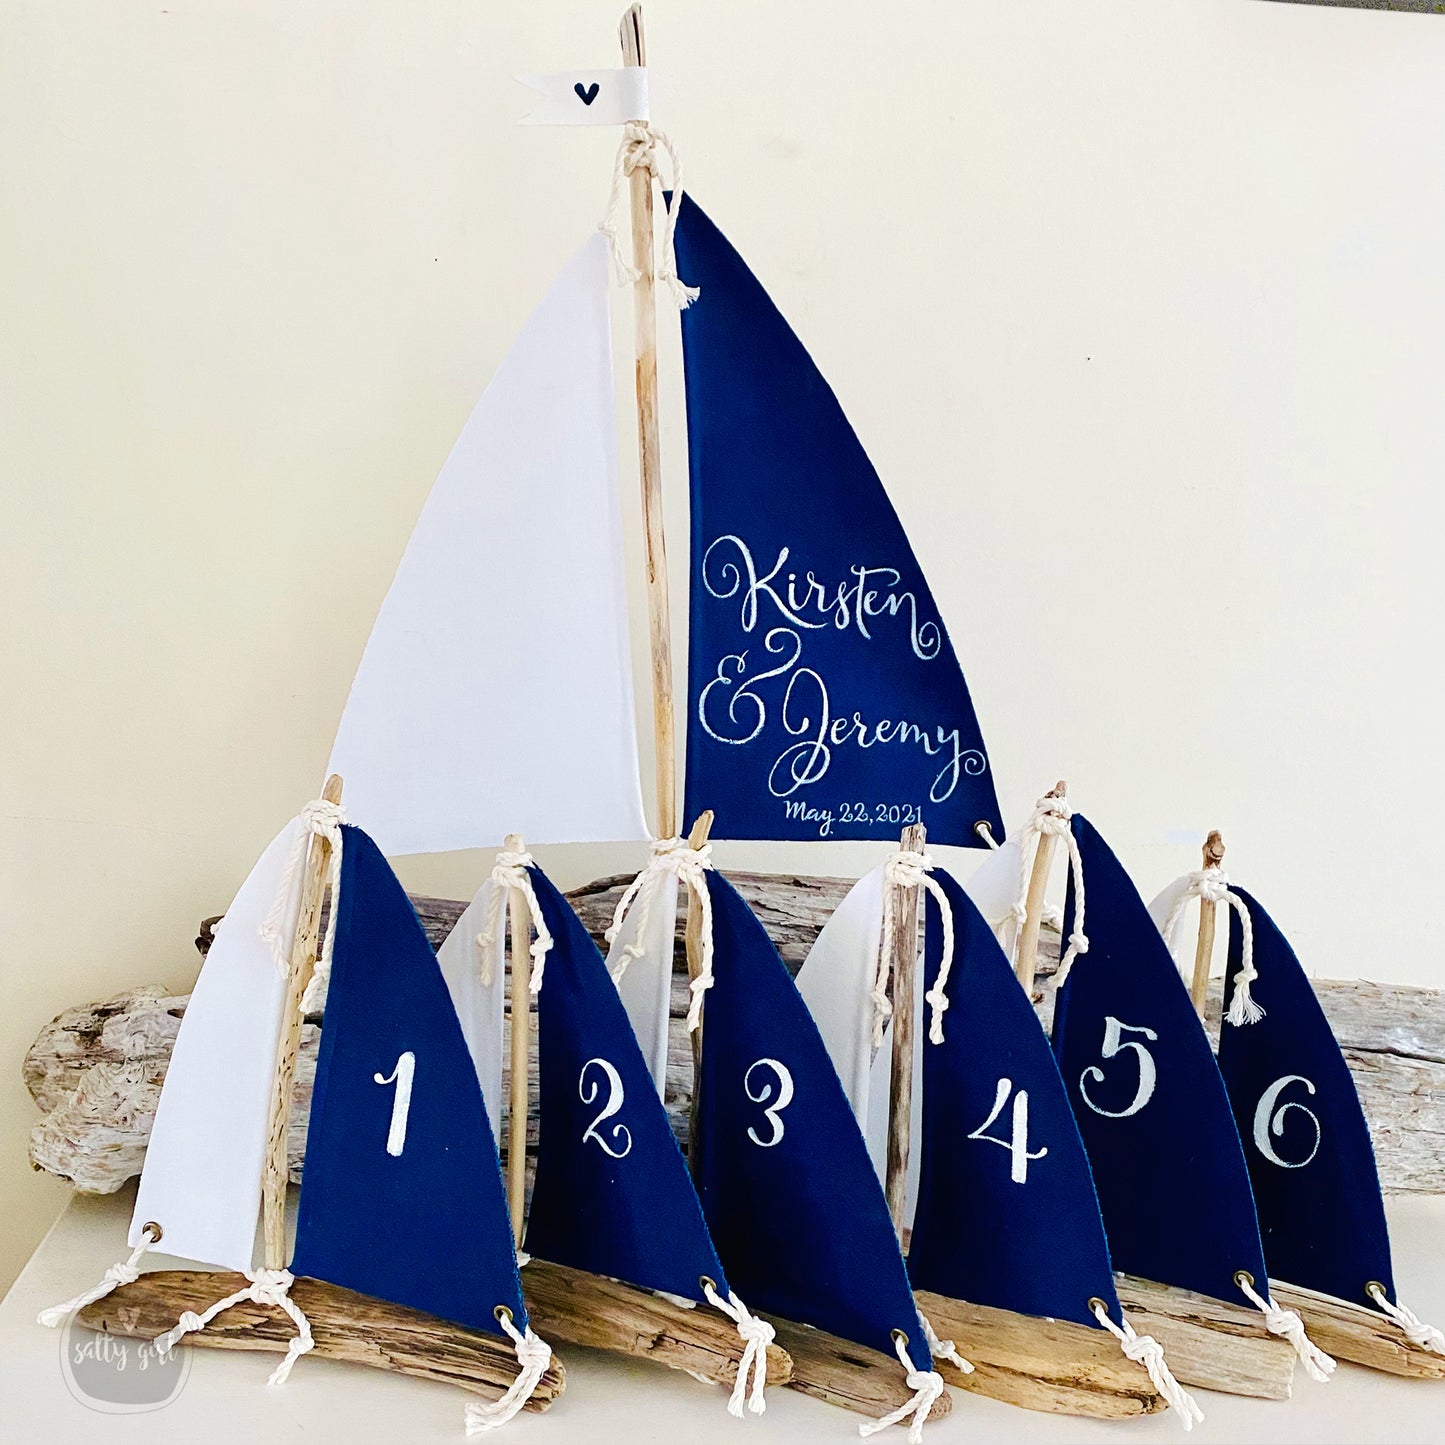 a row of sailboats with numbers on them